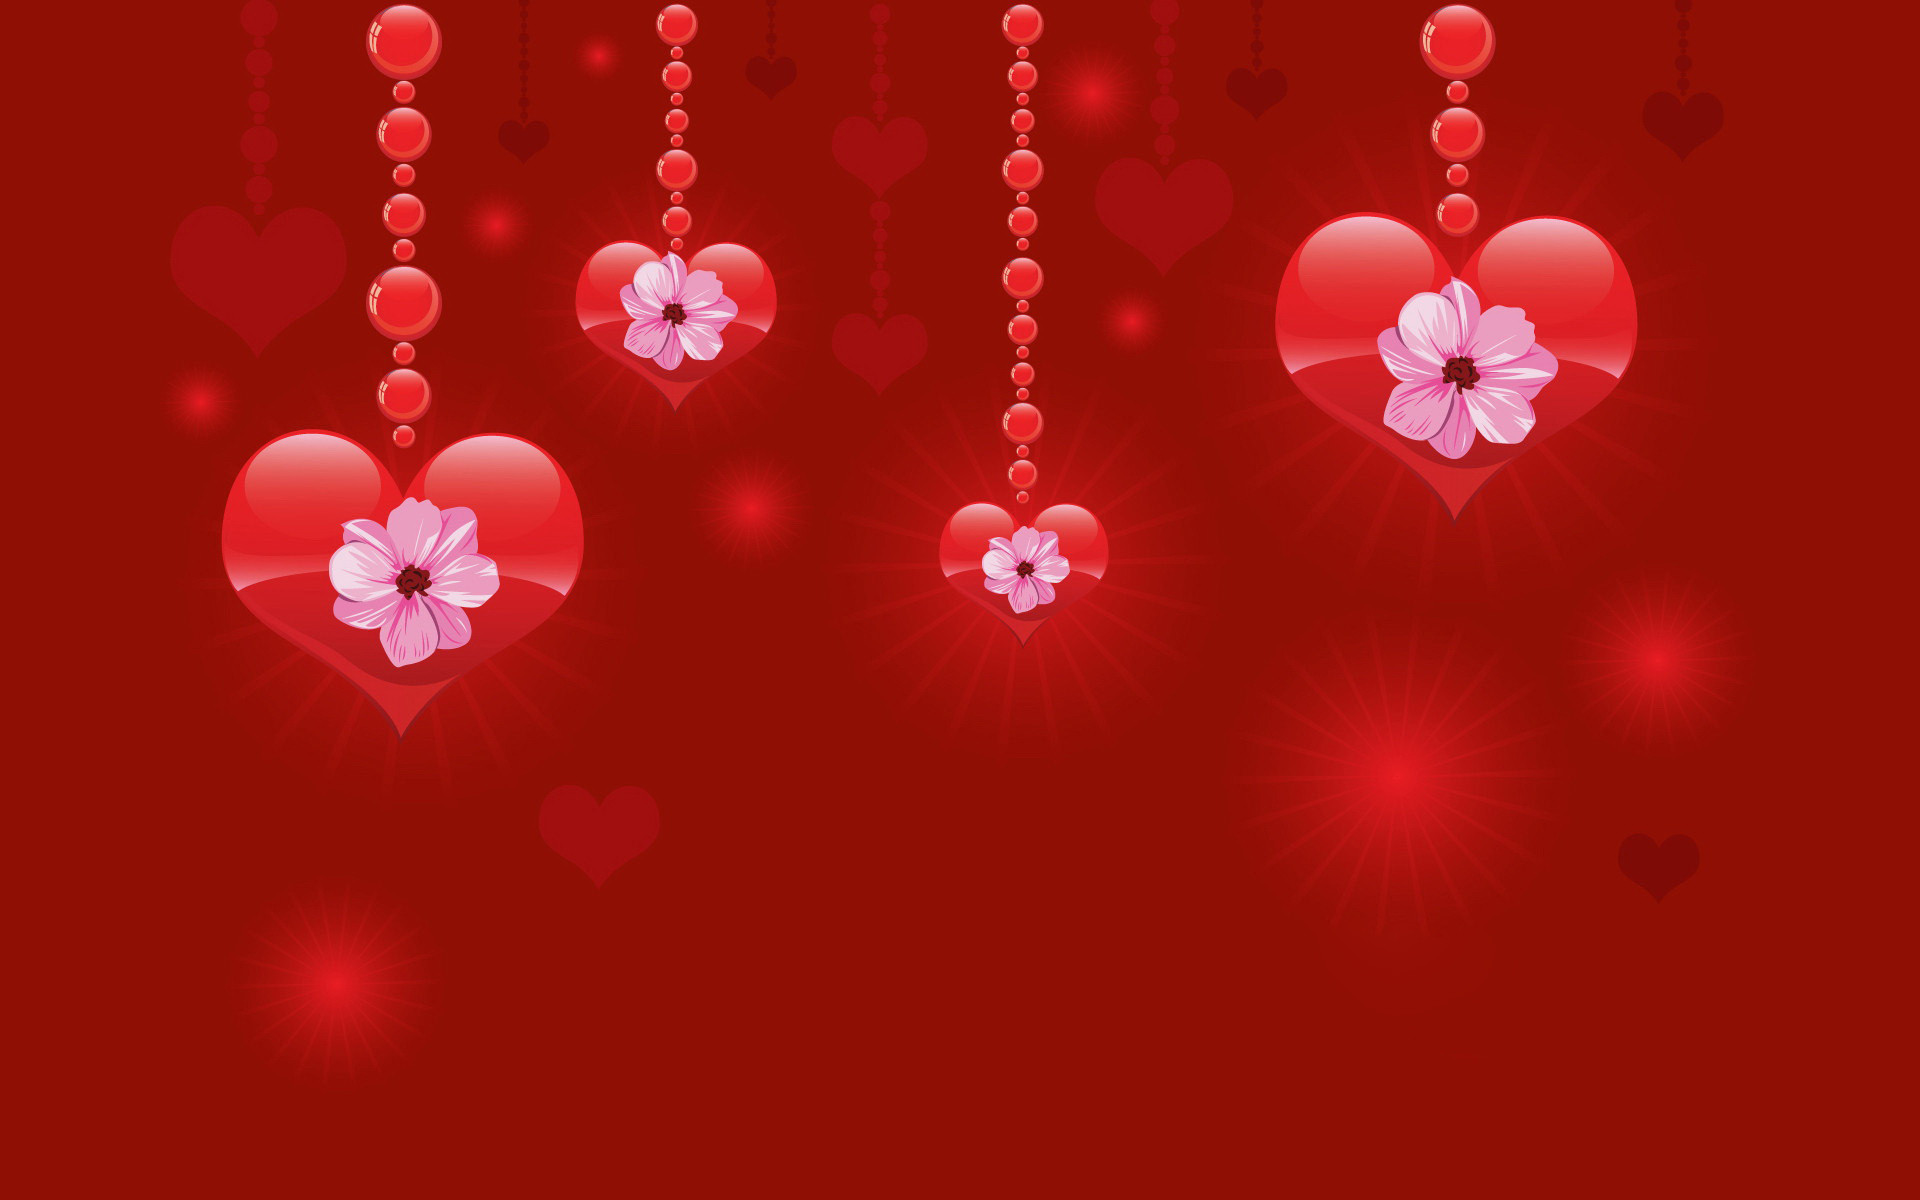 Valentines day backgrounds